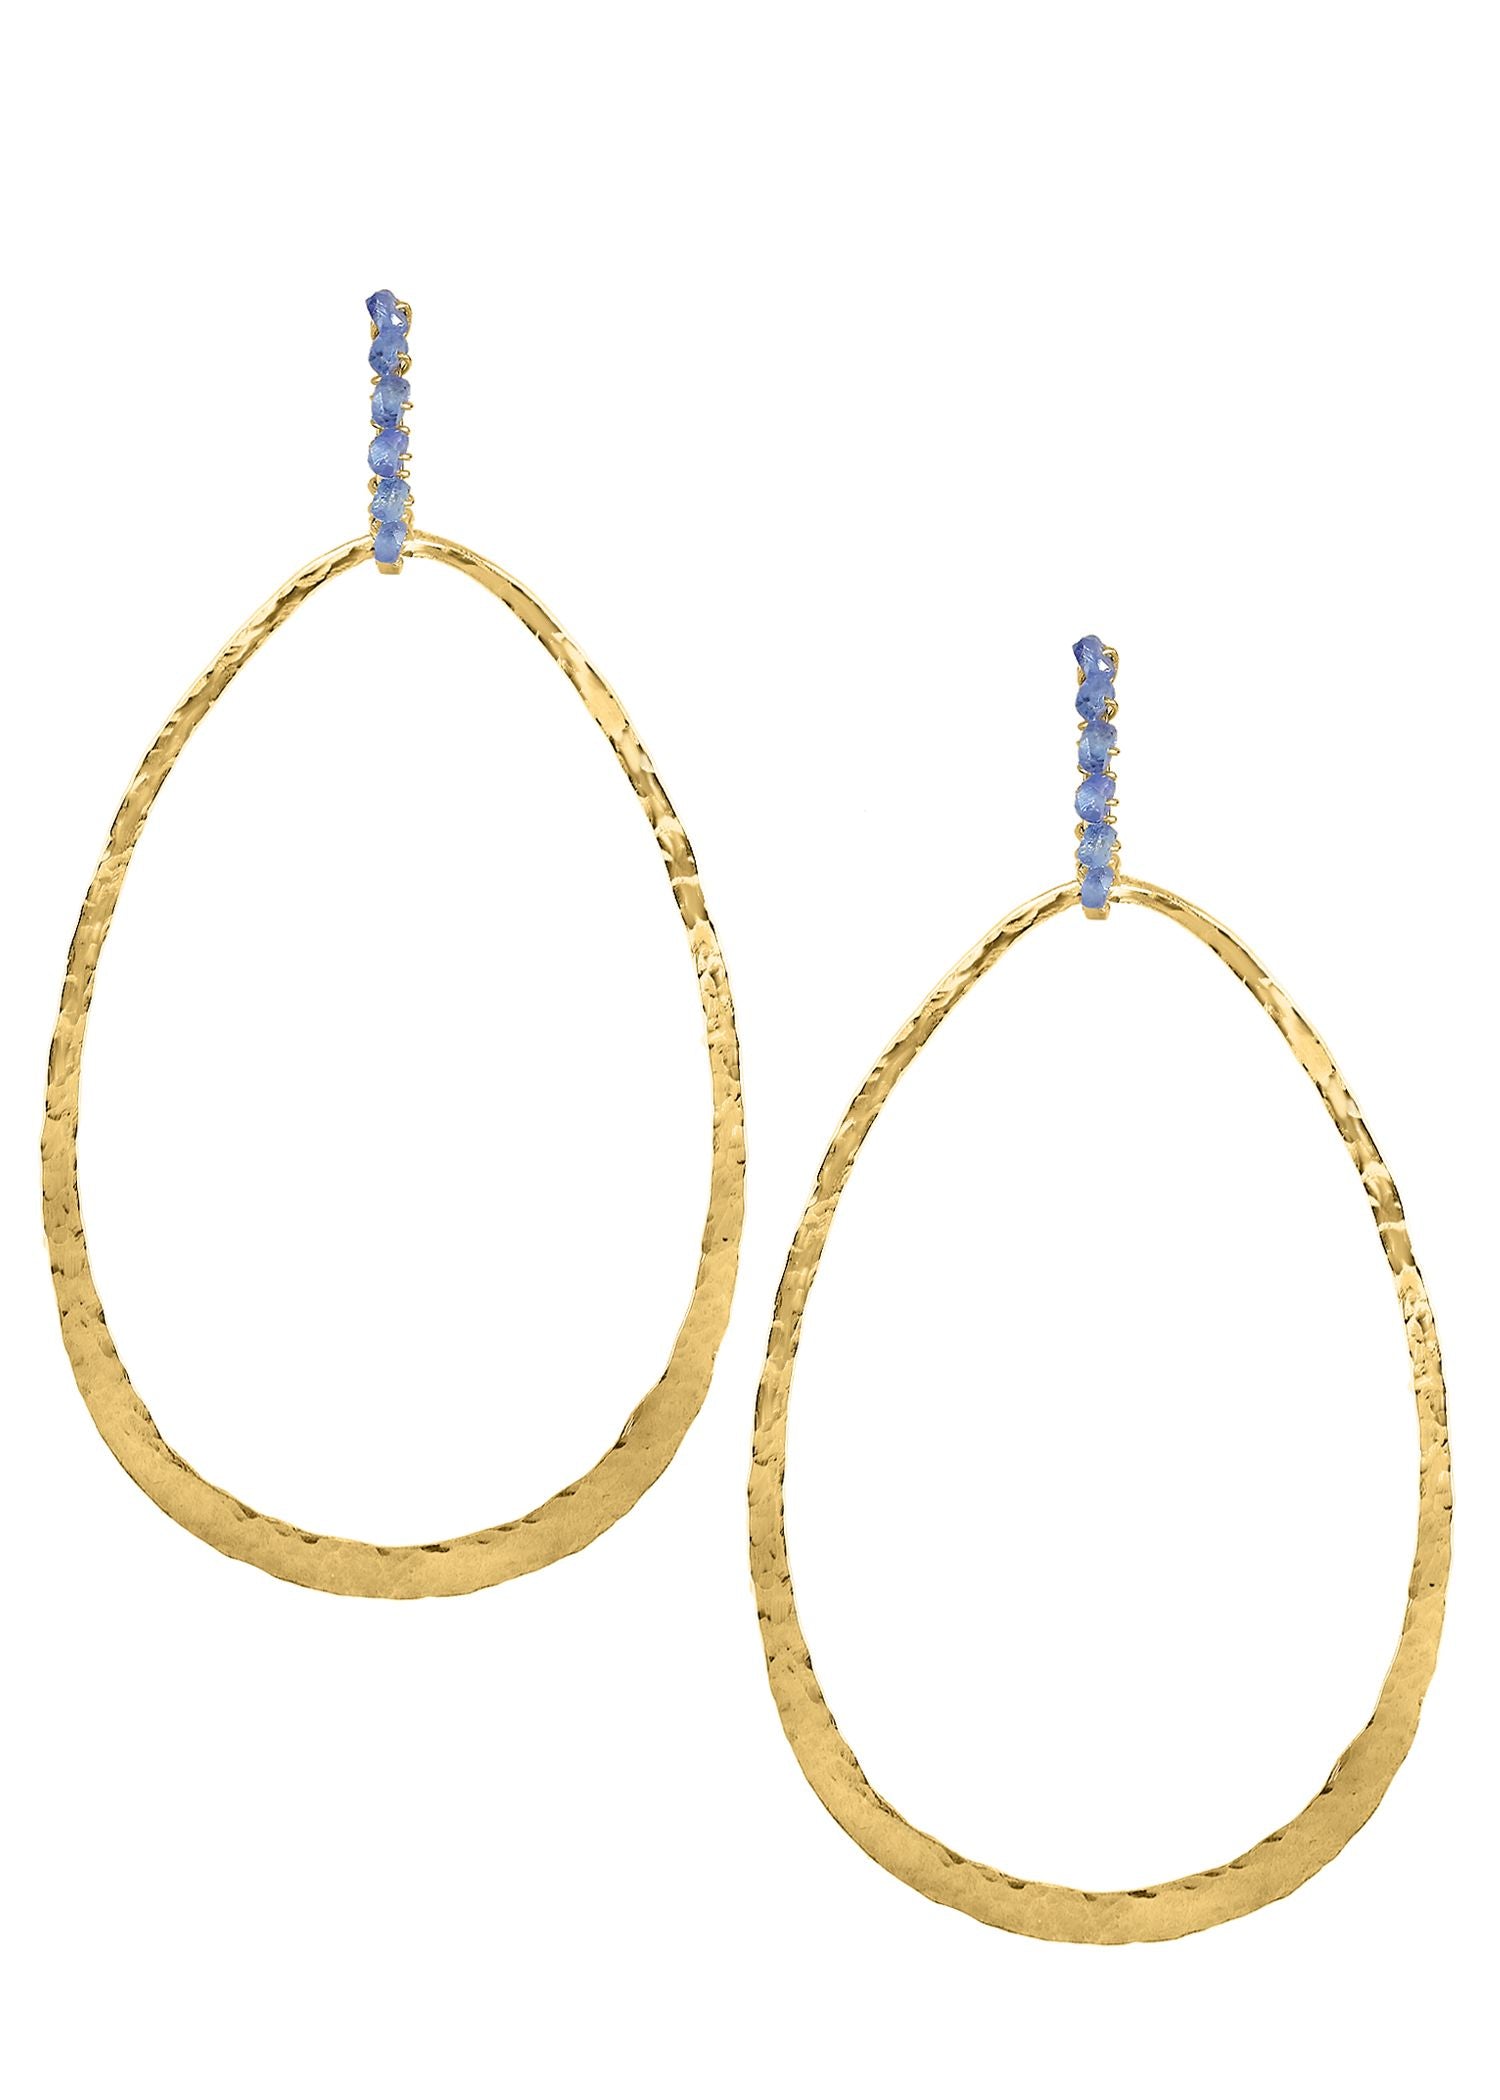 Blue sapphire 14k gold fill Earrings measure 2-5/16" in length (including the levers) and 1-1/8" in width Handmade in our Los Angeles studio